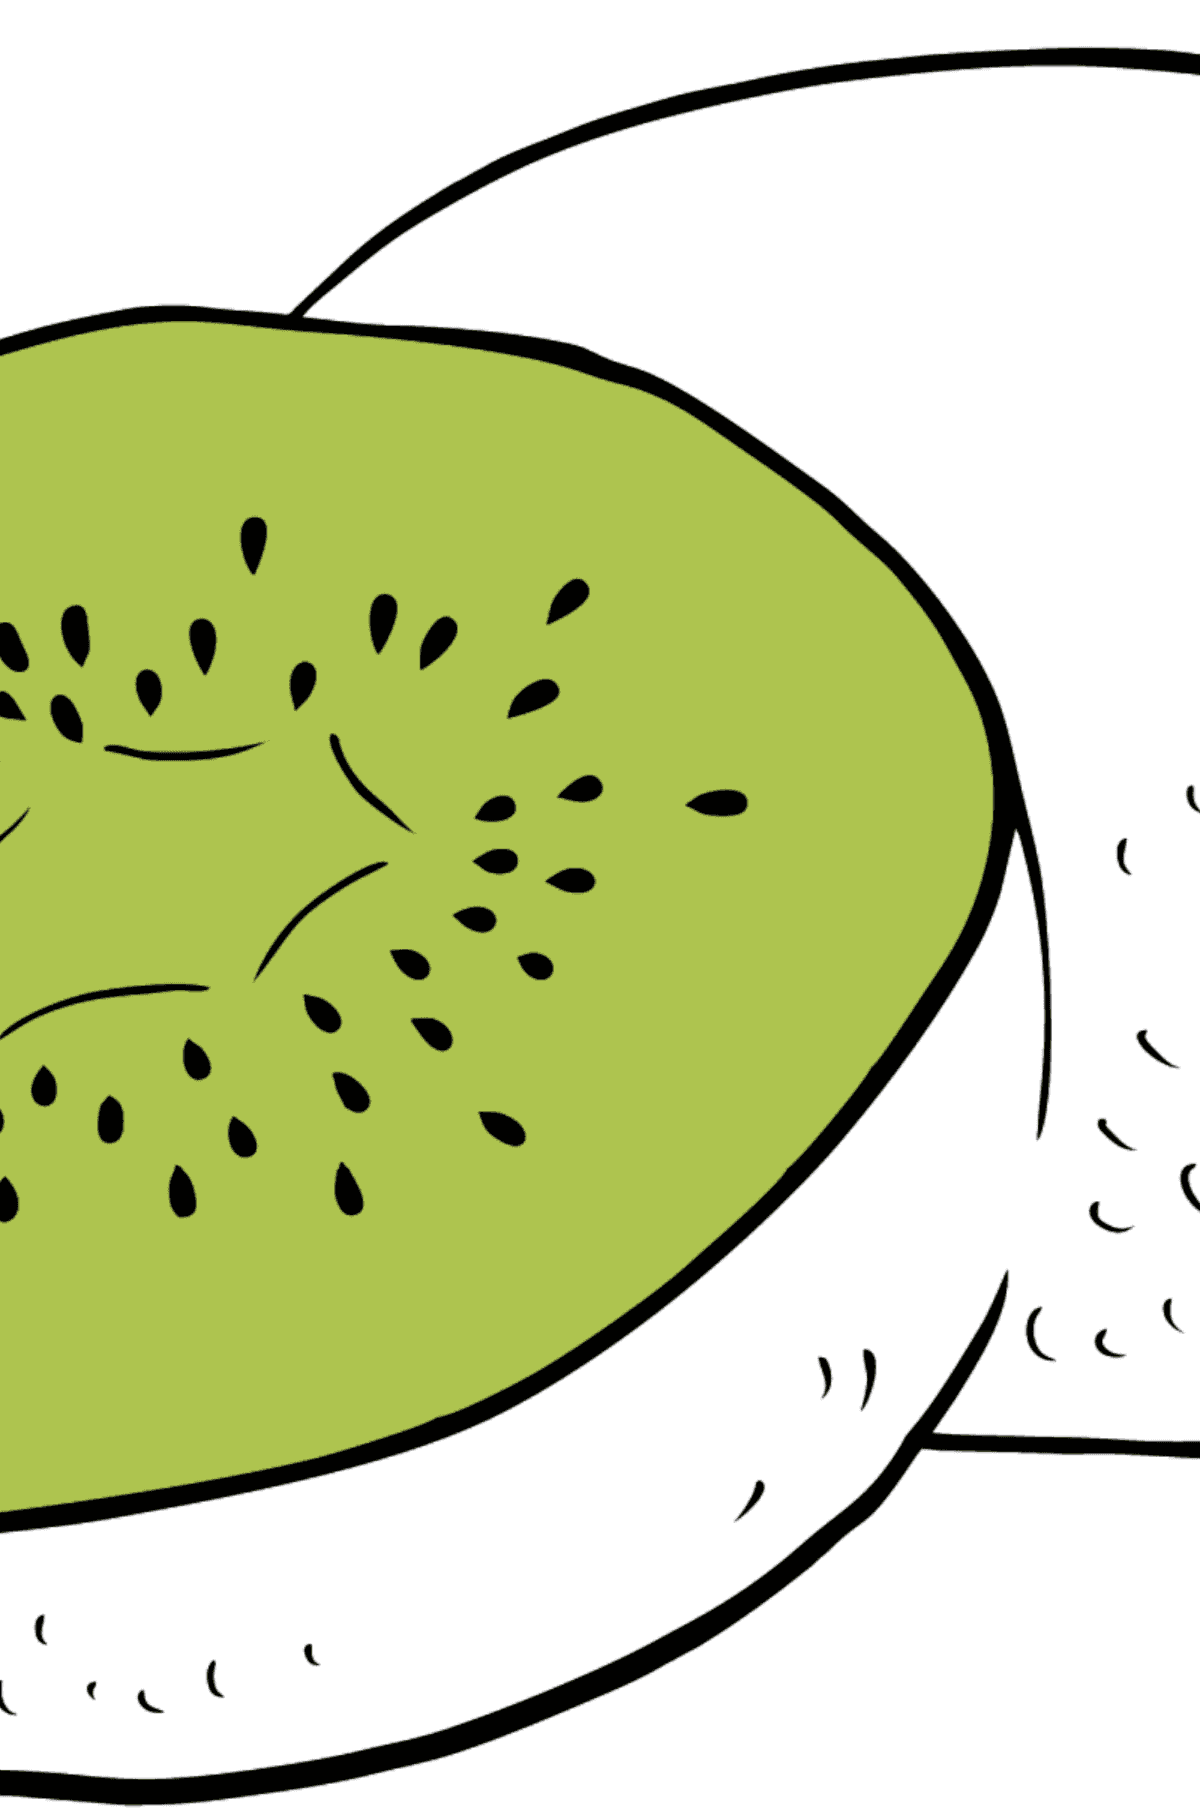 Kiwi coloring page - Coloring by Symbols for Kids